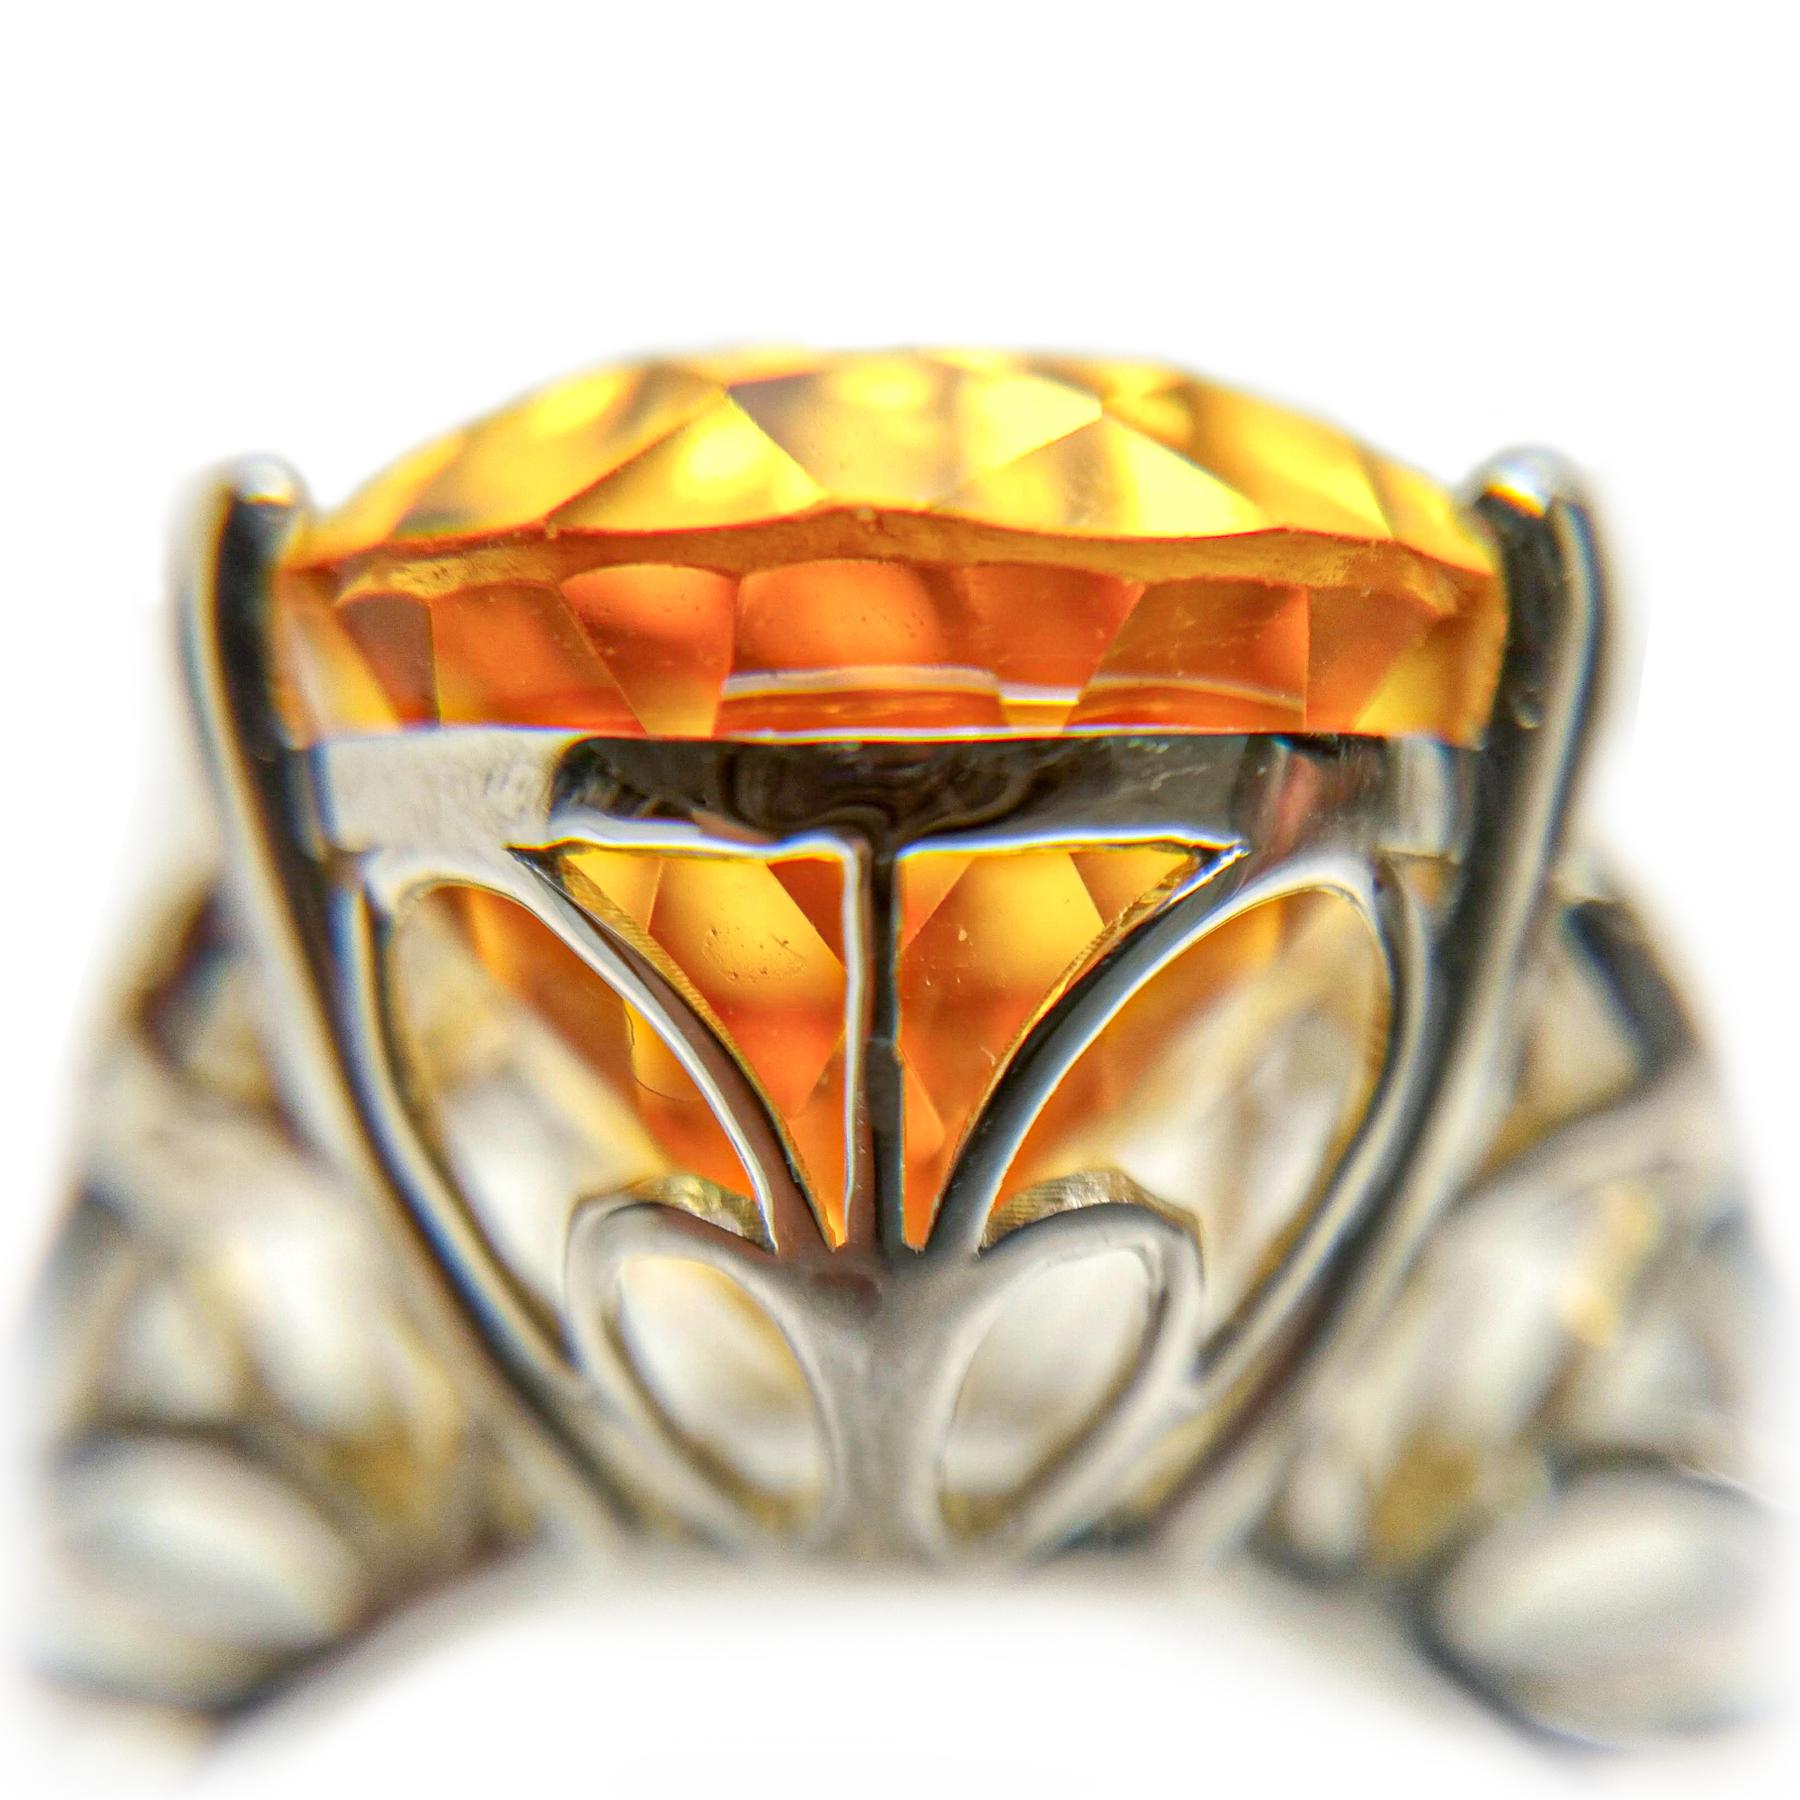 Pear shape citrine and diamond cocktail ring. Handcrafted, contemporary, golden honey yellow, transparency and  high luster 13.91 carats pear shape citrine set in high profile, encased in basket mounting with four bead prongs and one split prong.